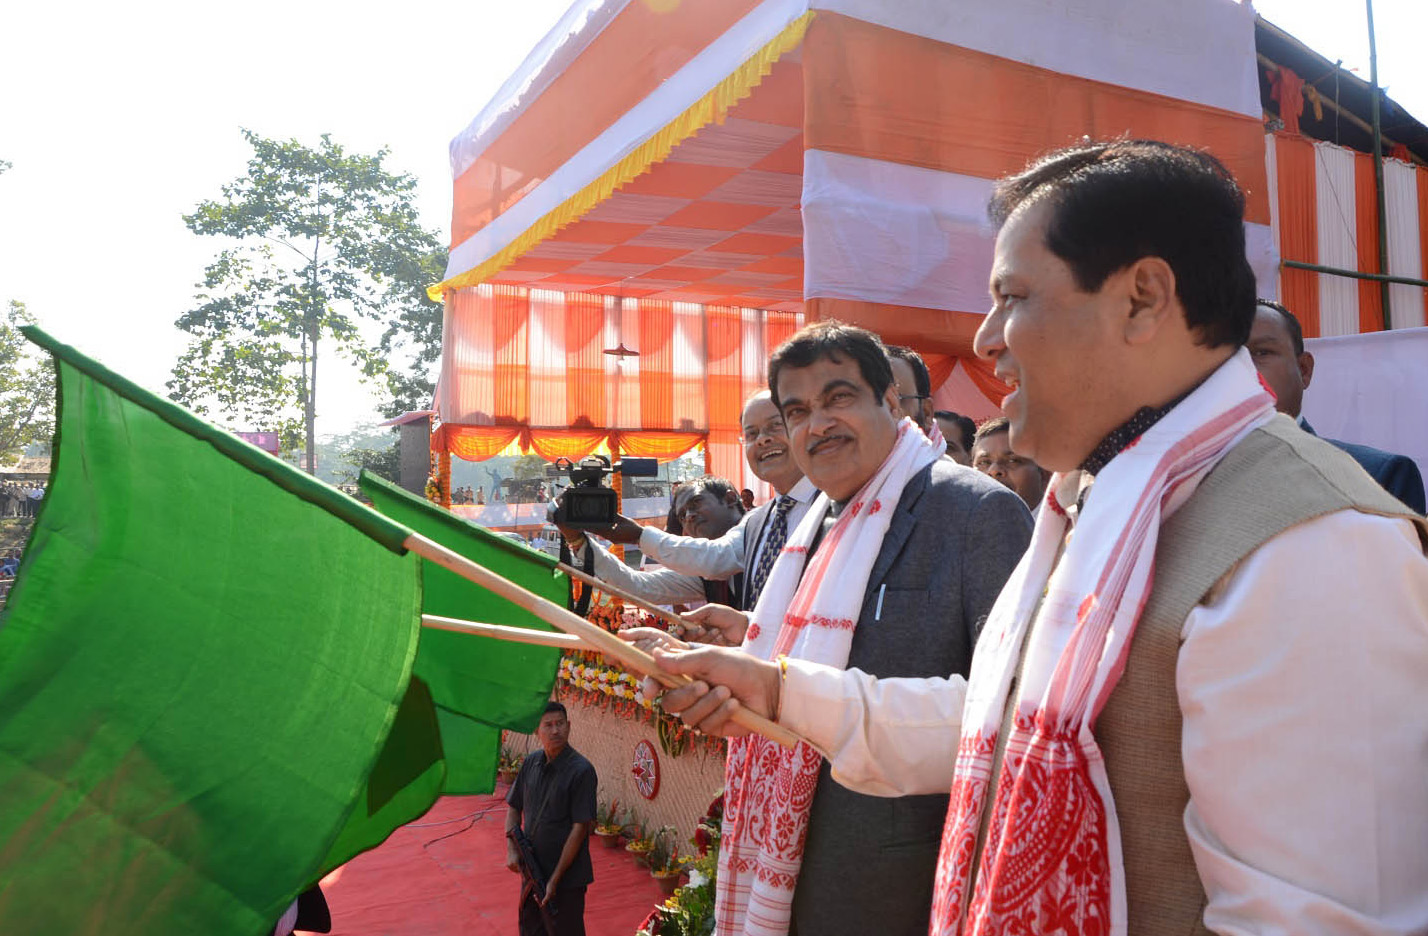 The Union Minister for Road Transport & Highways, Shipping and Water Resources, River Development & Ganga Rejuvenation, Shri Nitin Gadkari flagging off the Regular Inland Waterways from Pandu to Dhubri/Hatsingimari on River Brahmaputra, at a function, at Rawnapara, Majuli on December 29, 2017. The Chief Minister of Assam, Shri Sarbananda Sonowal is also seen.